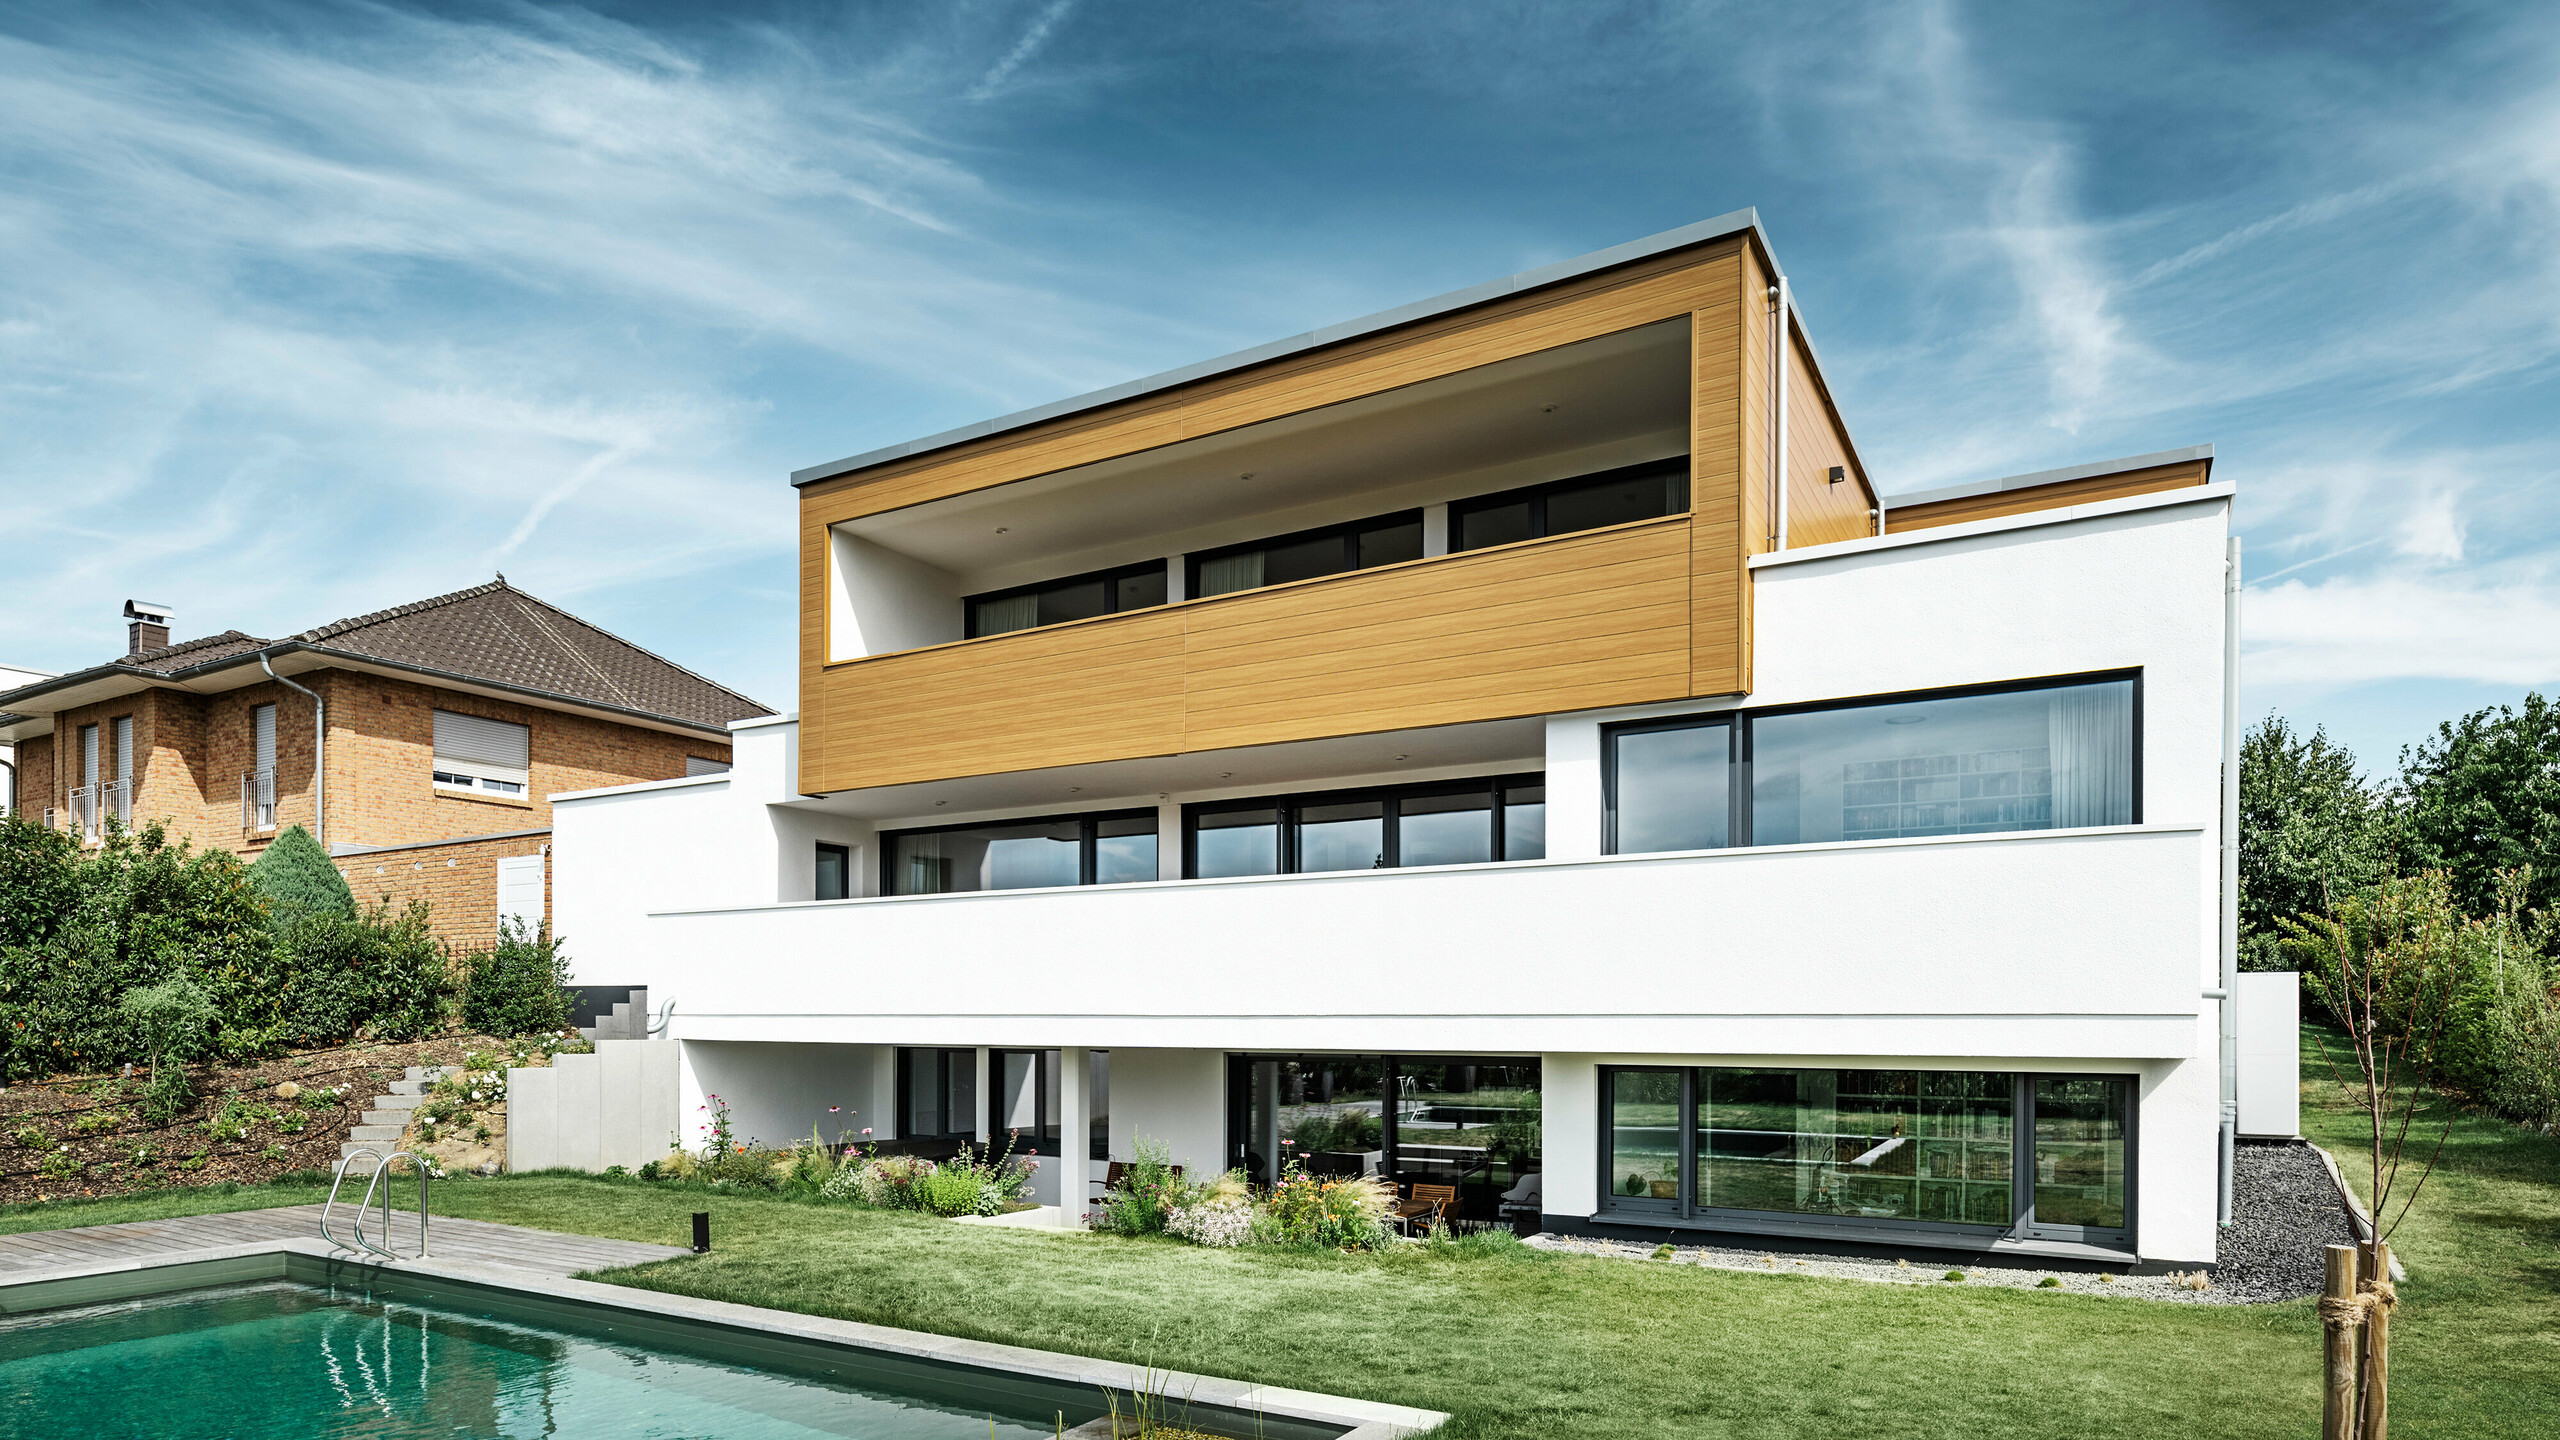 The rear of a modern detached house in Usingen, Germany. The green lawn, a pool and a young garden tree can be seen at the bottom of the picture. The eye-catching house has a white building base made of a rendered façade, an aluminium façade on the upper floor made of PREFA sidings in natural oak and large window areas with an anthracite-coloured frame. From a distance, the neighbouring house with a brick façade can be seen on the left edge of the picture.